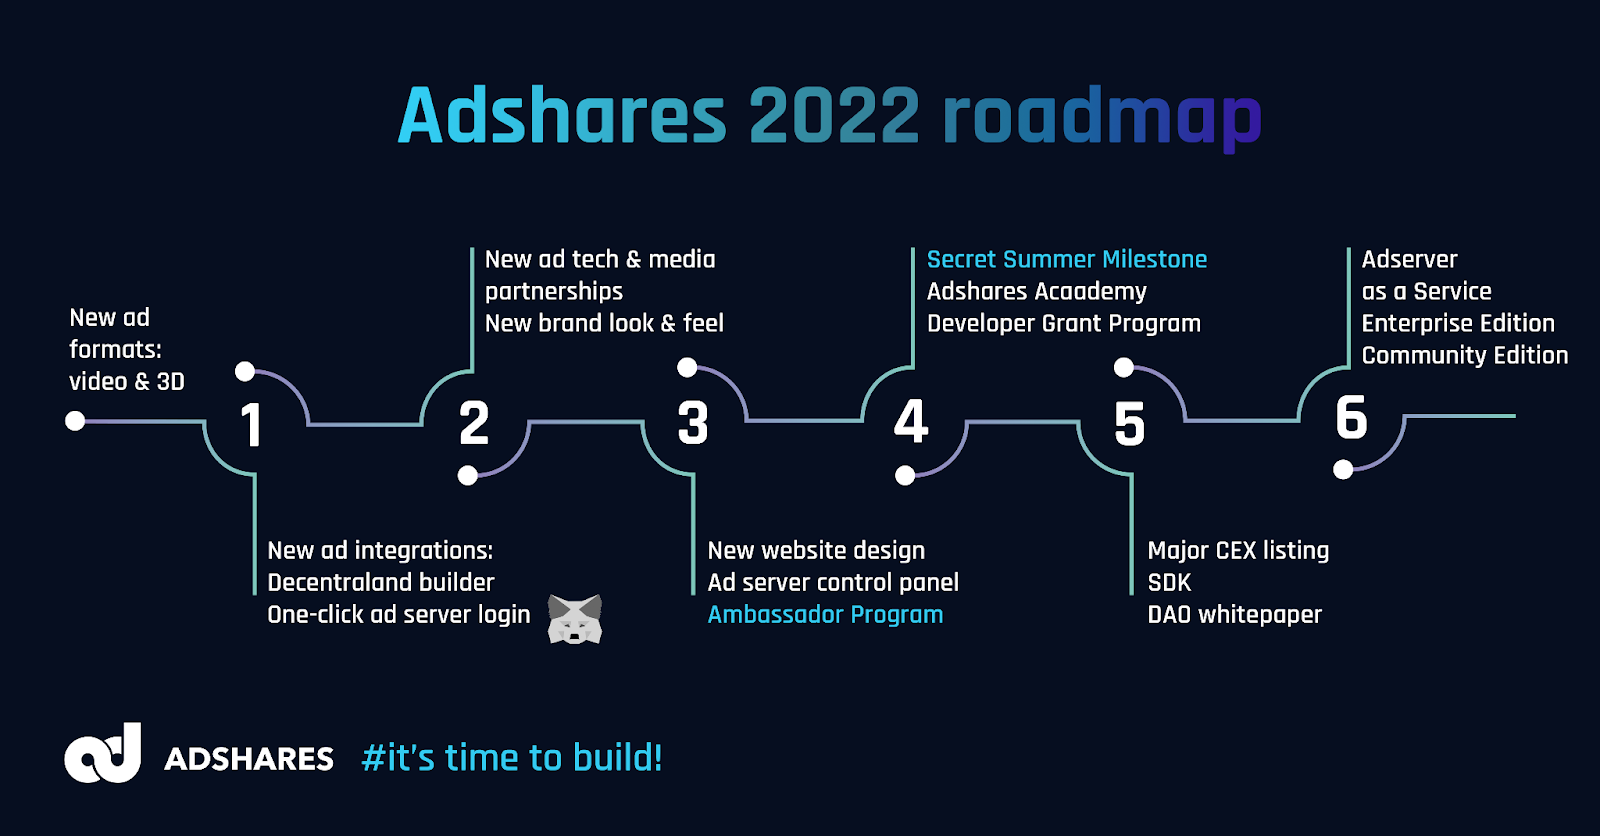 It’s Time to Build: Adshares Reveals Exciting New Road Map After Successful 2021 